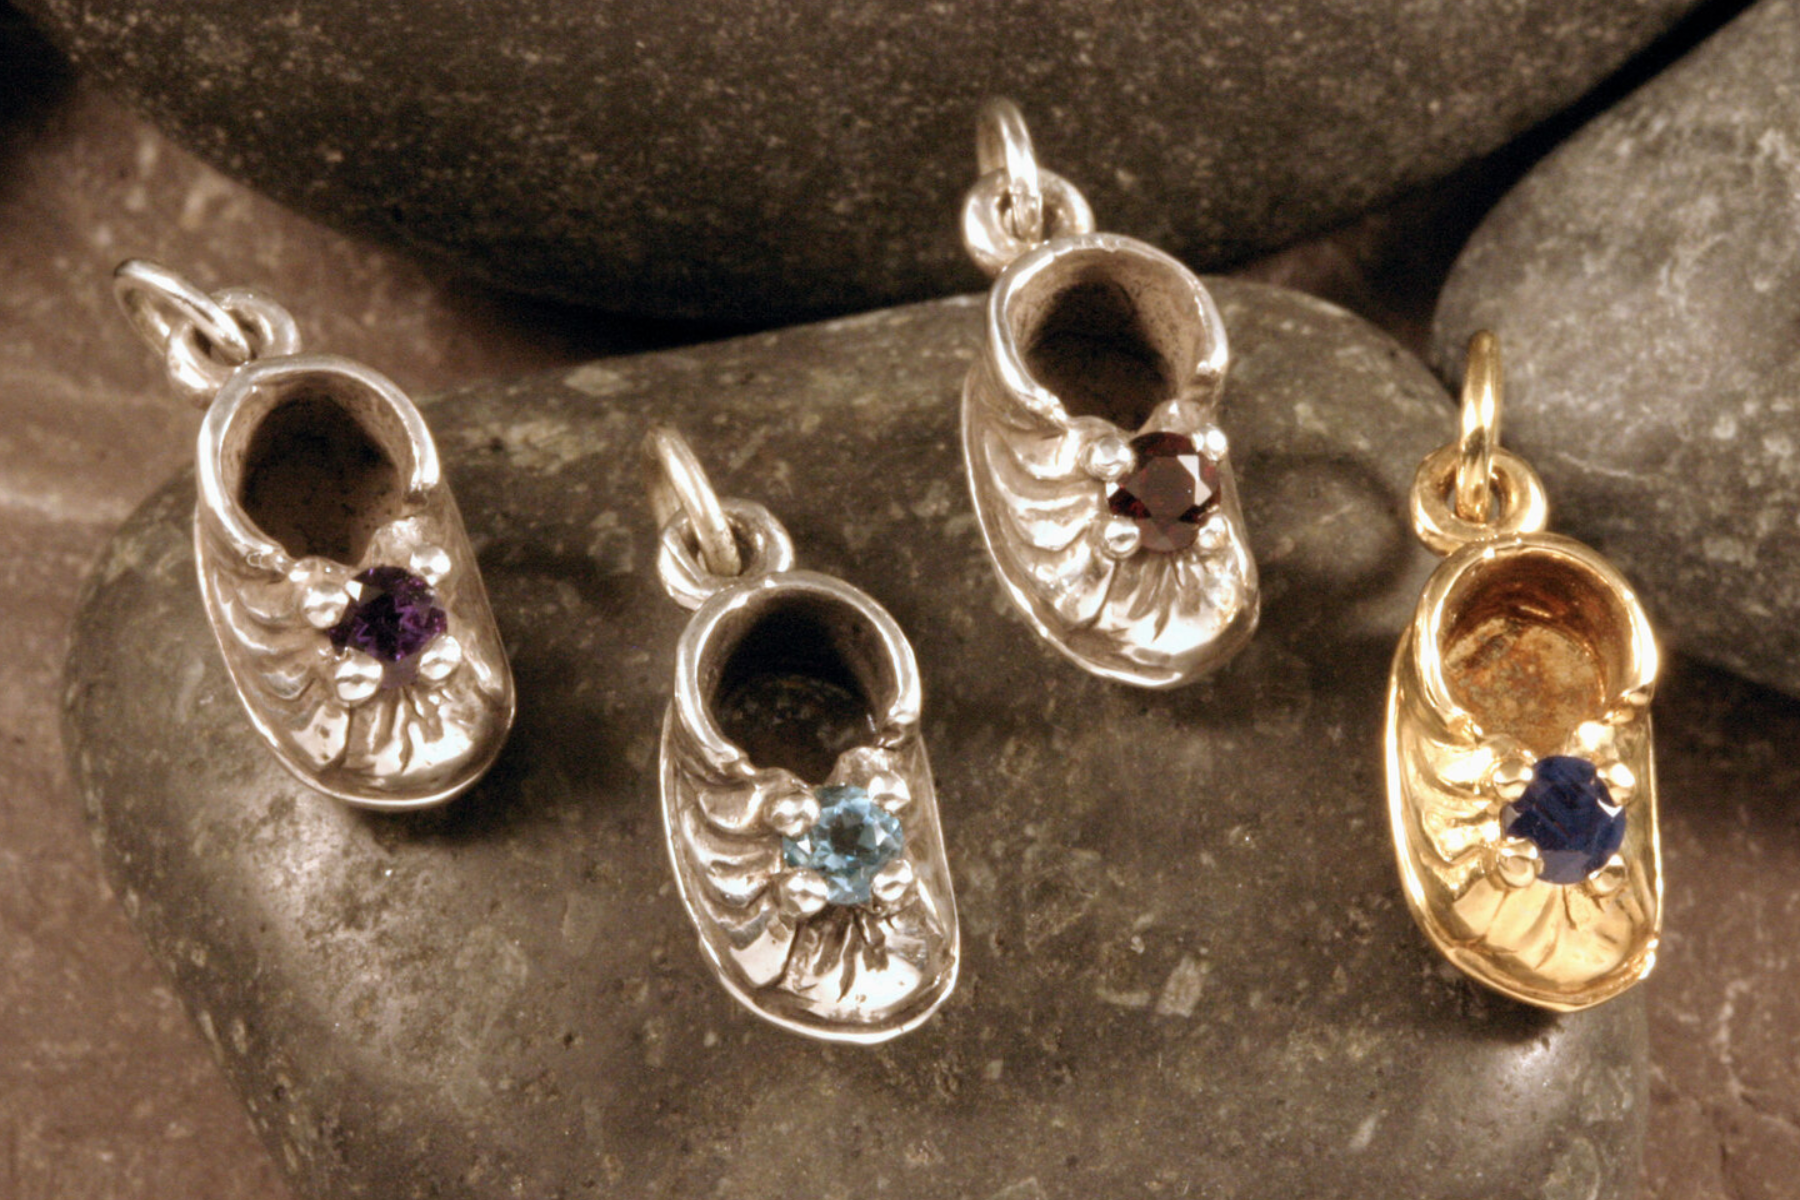 Four tiny shoe charms containing birthstones